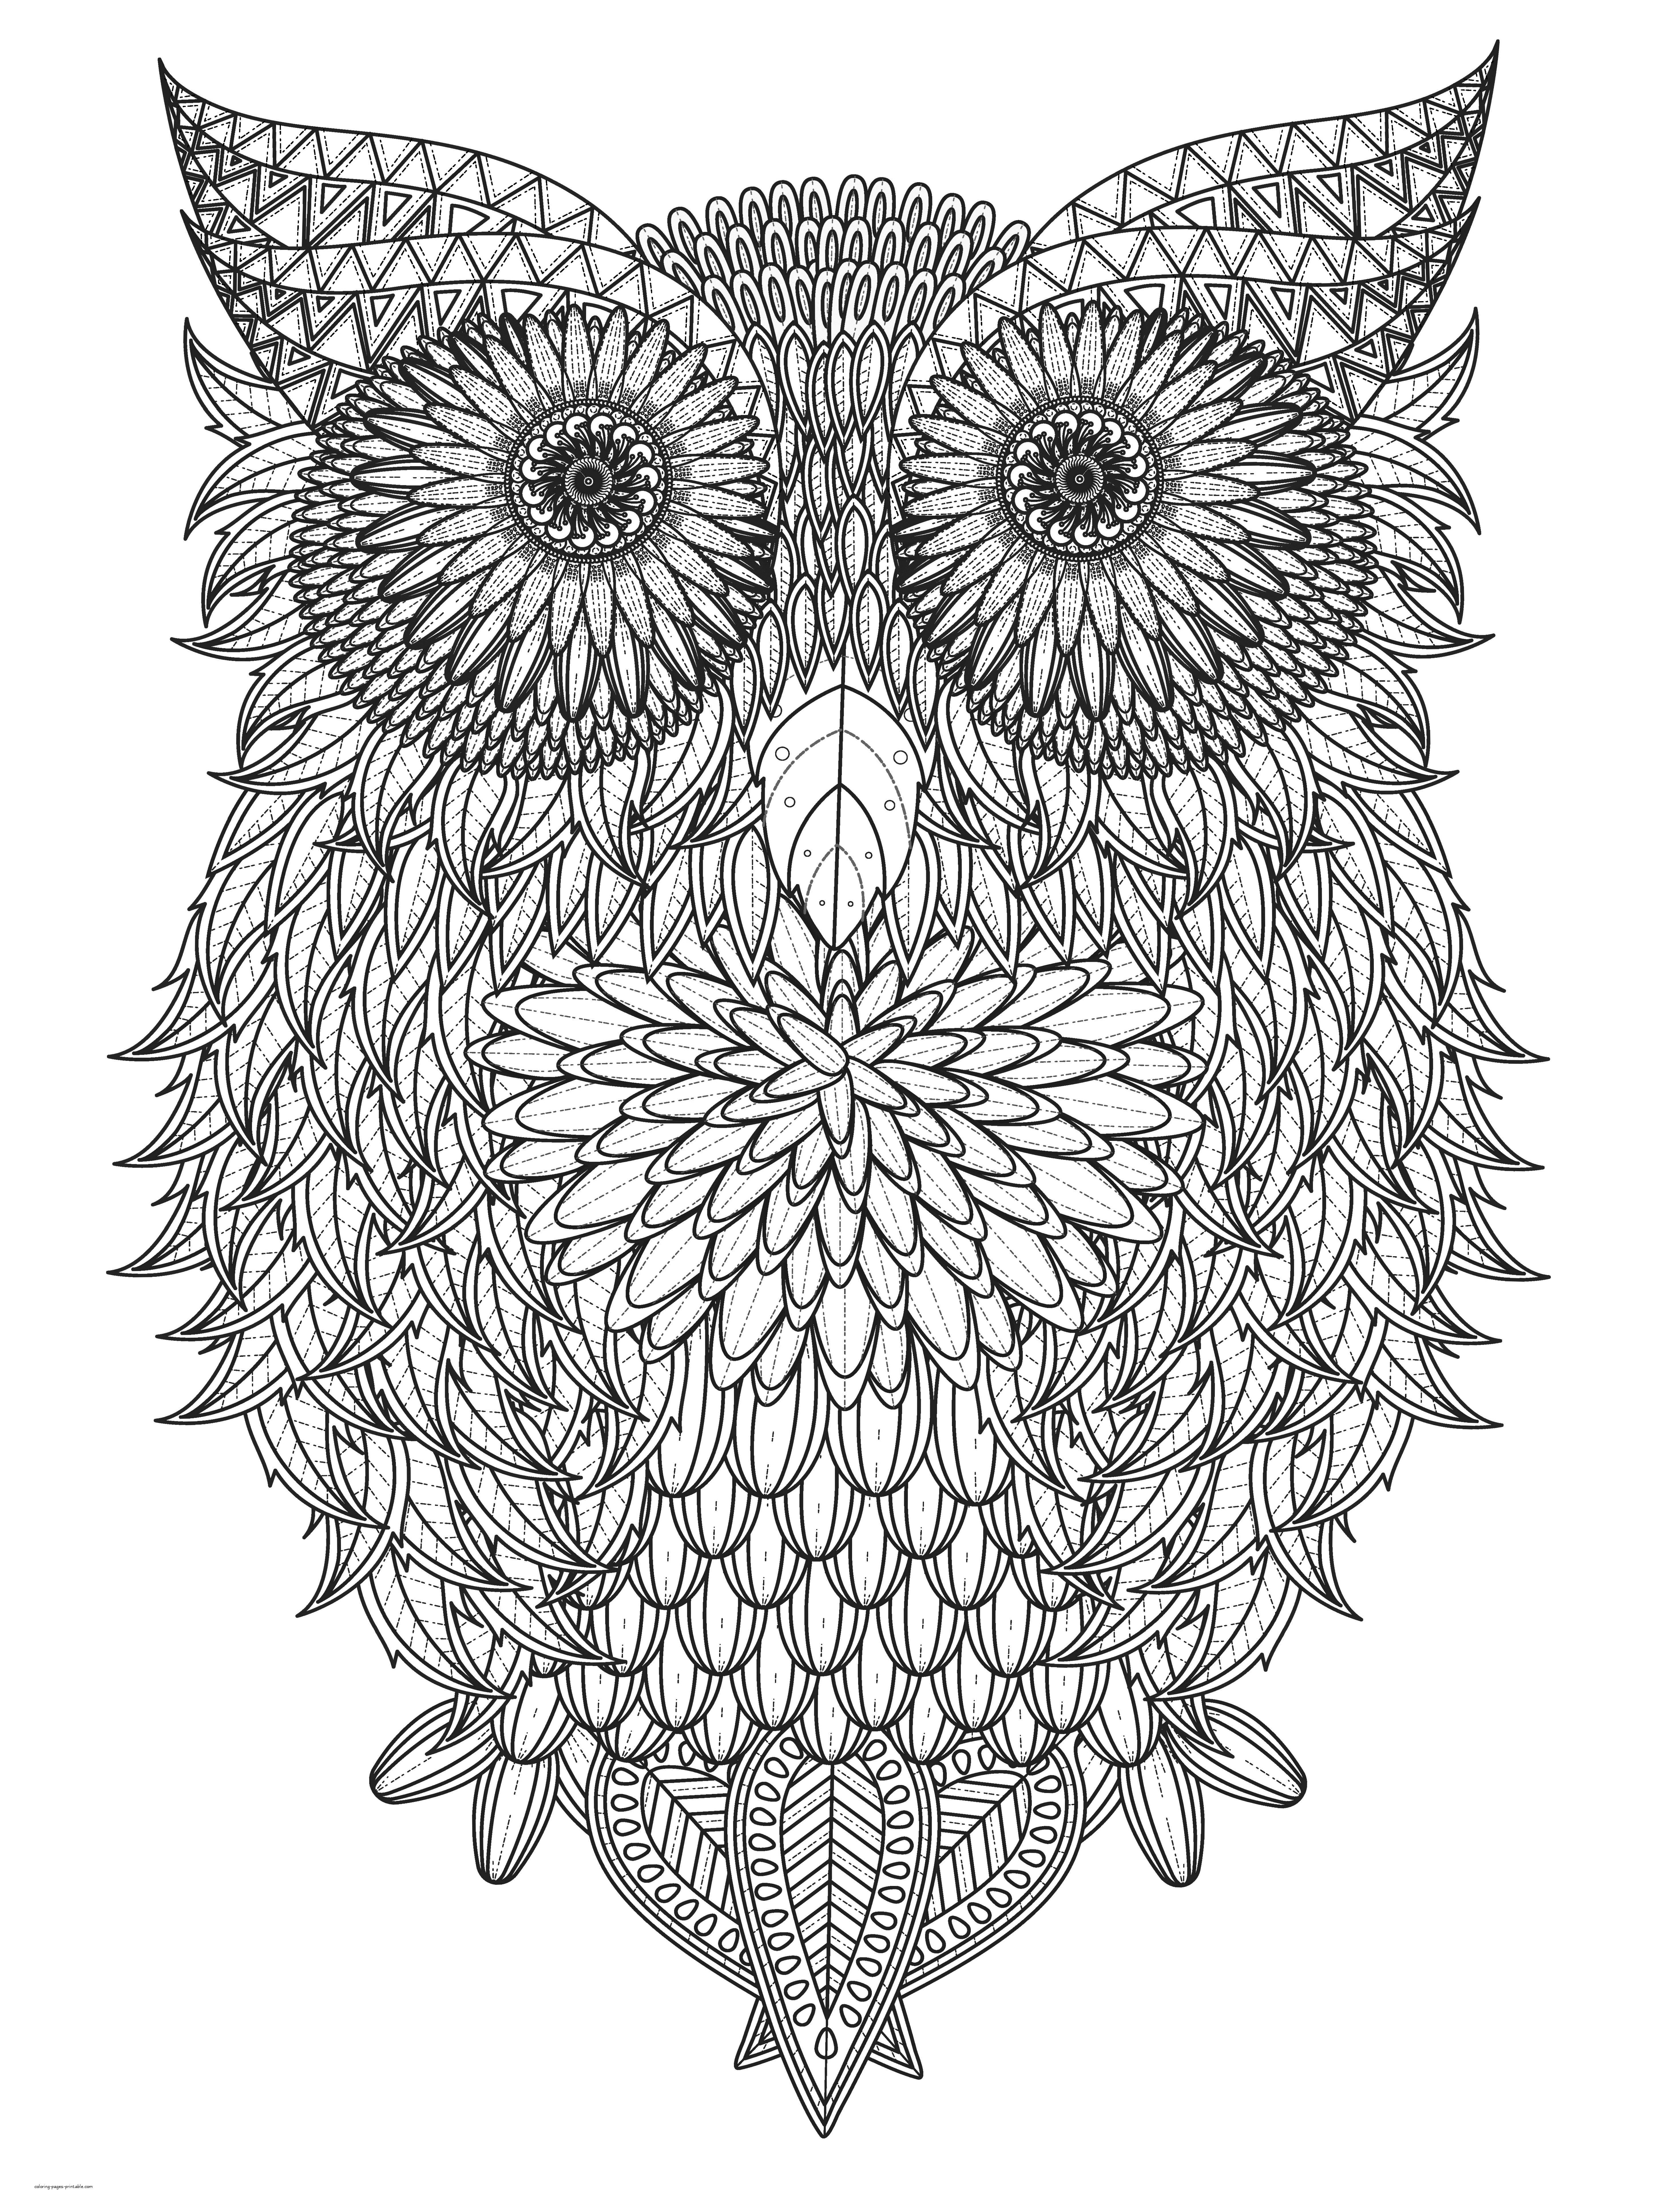 Big Difficult Coloring Page. An Owl Picture